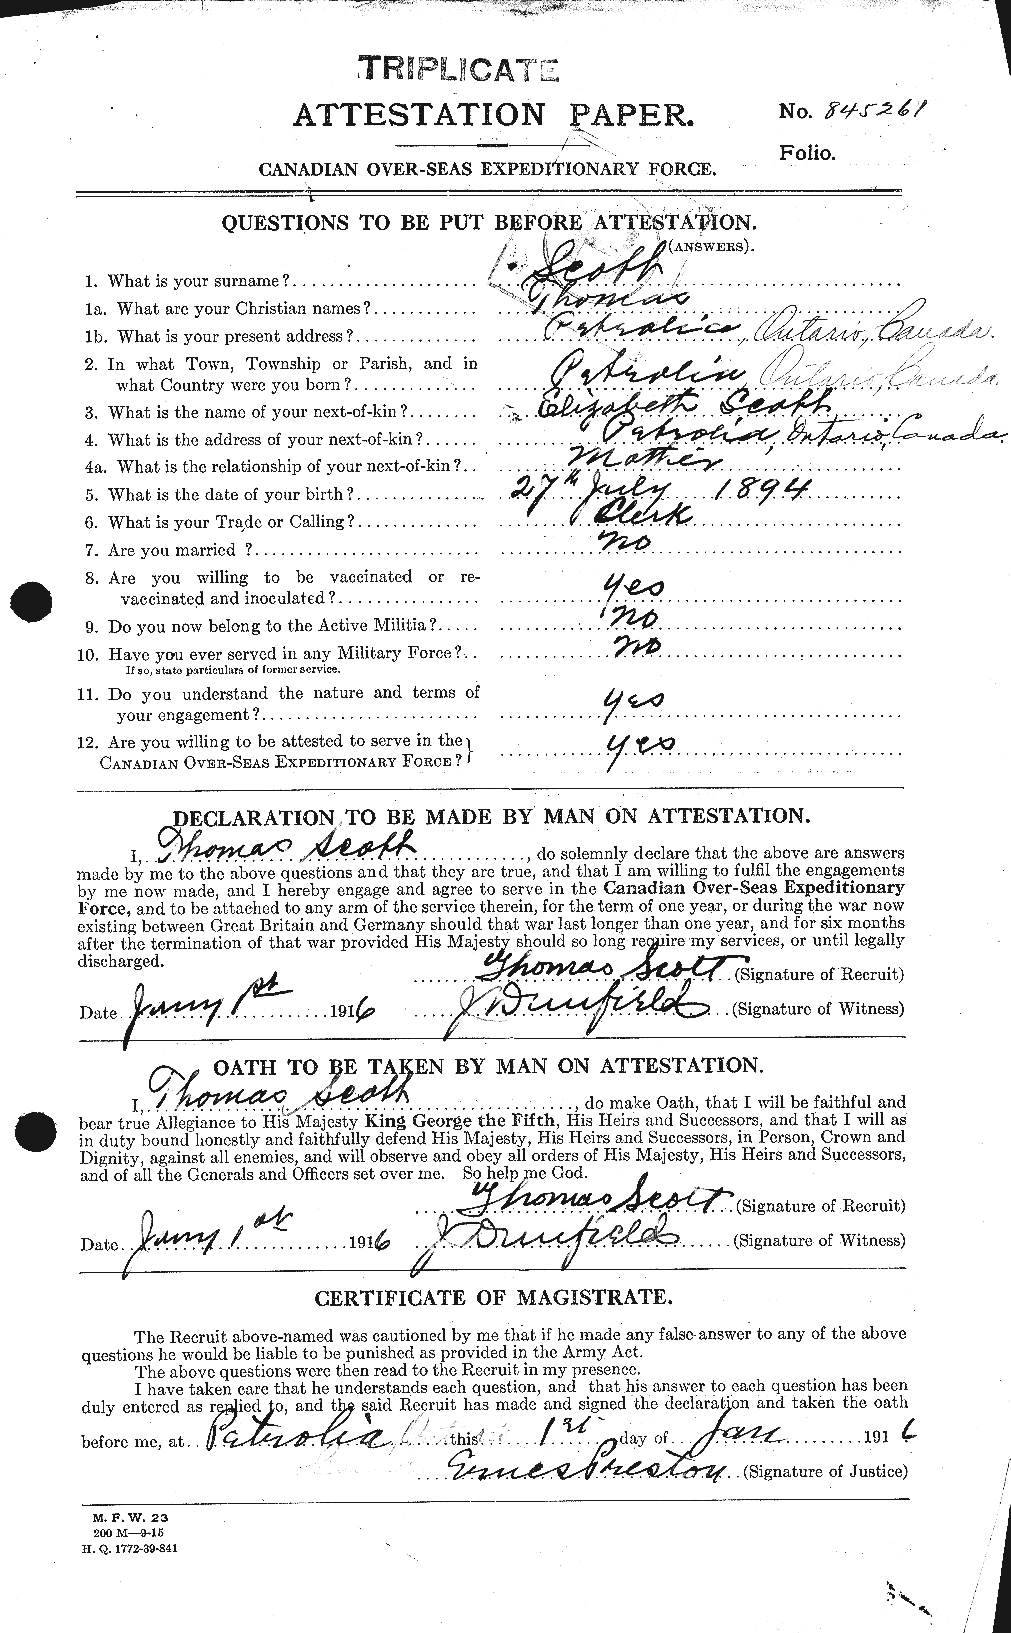 Personnel Records of the First World War - CEF 088534a